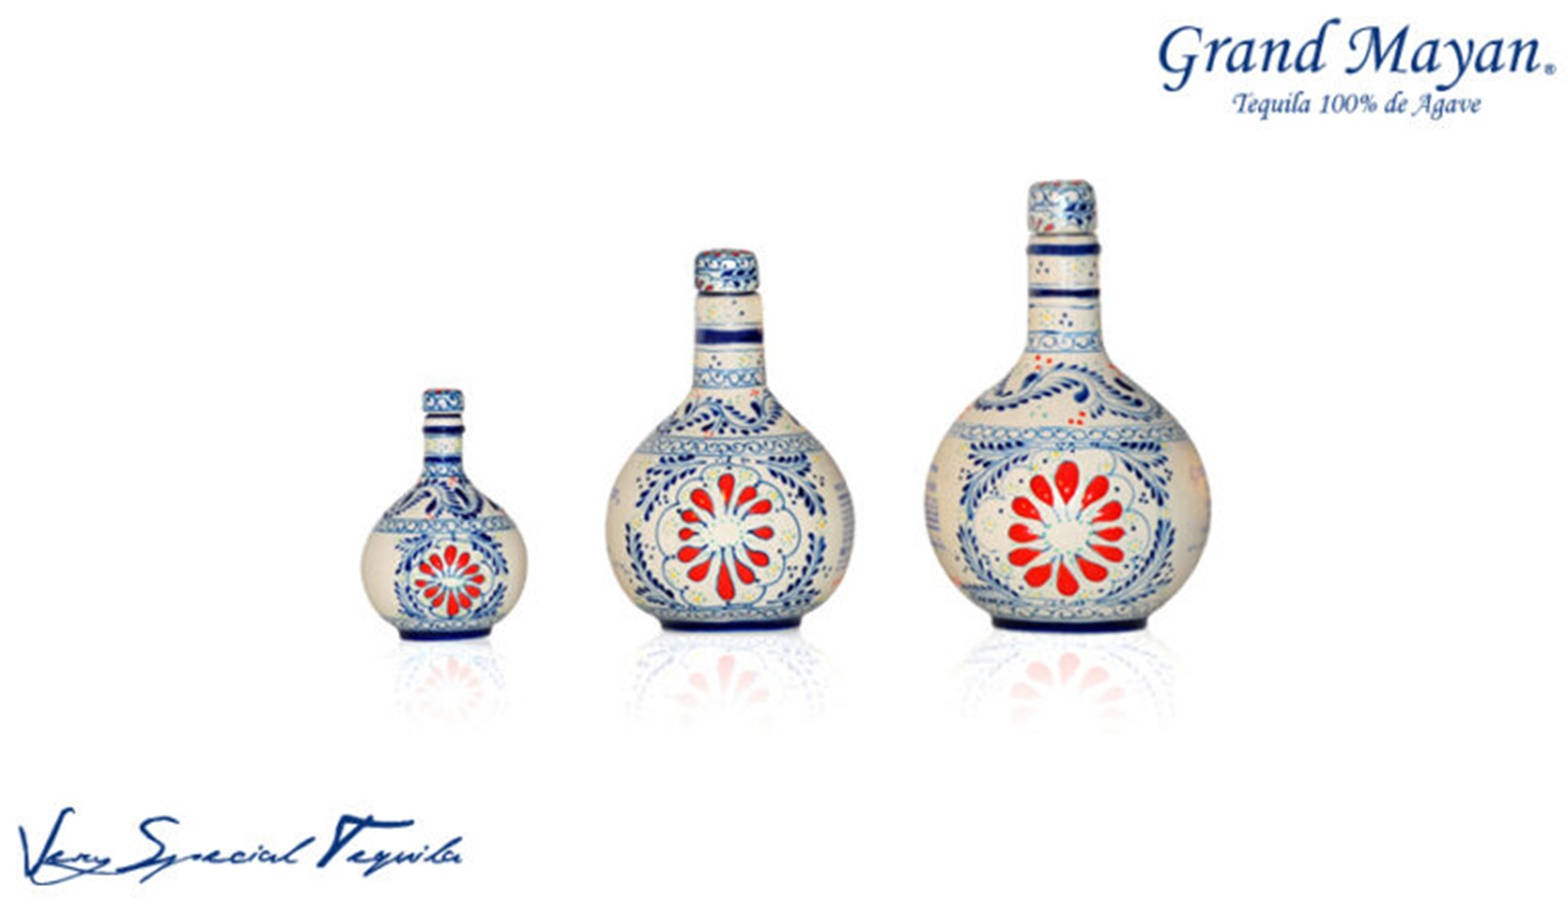 Grand Mayan Silver Tequila Ultra Aged Sizes Photography Wallpaper